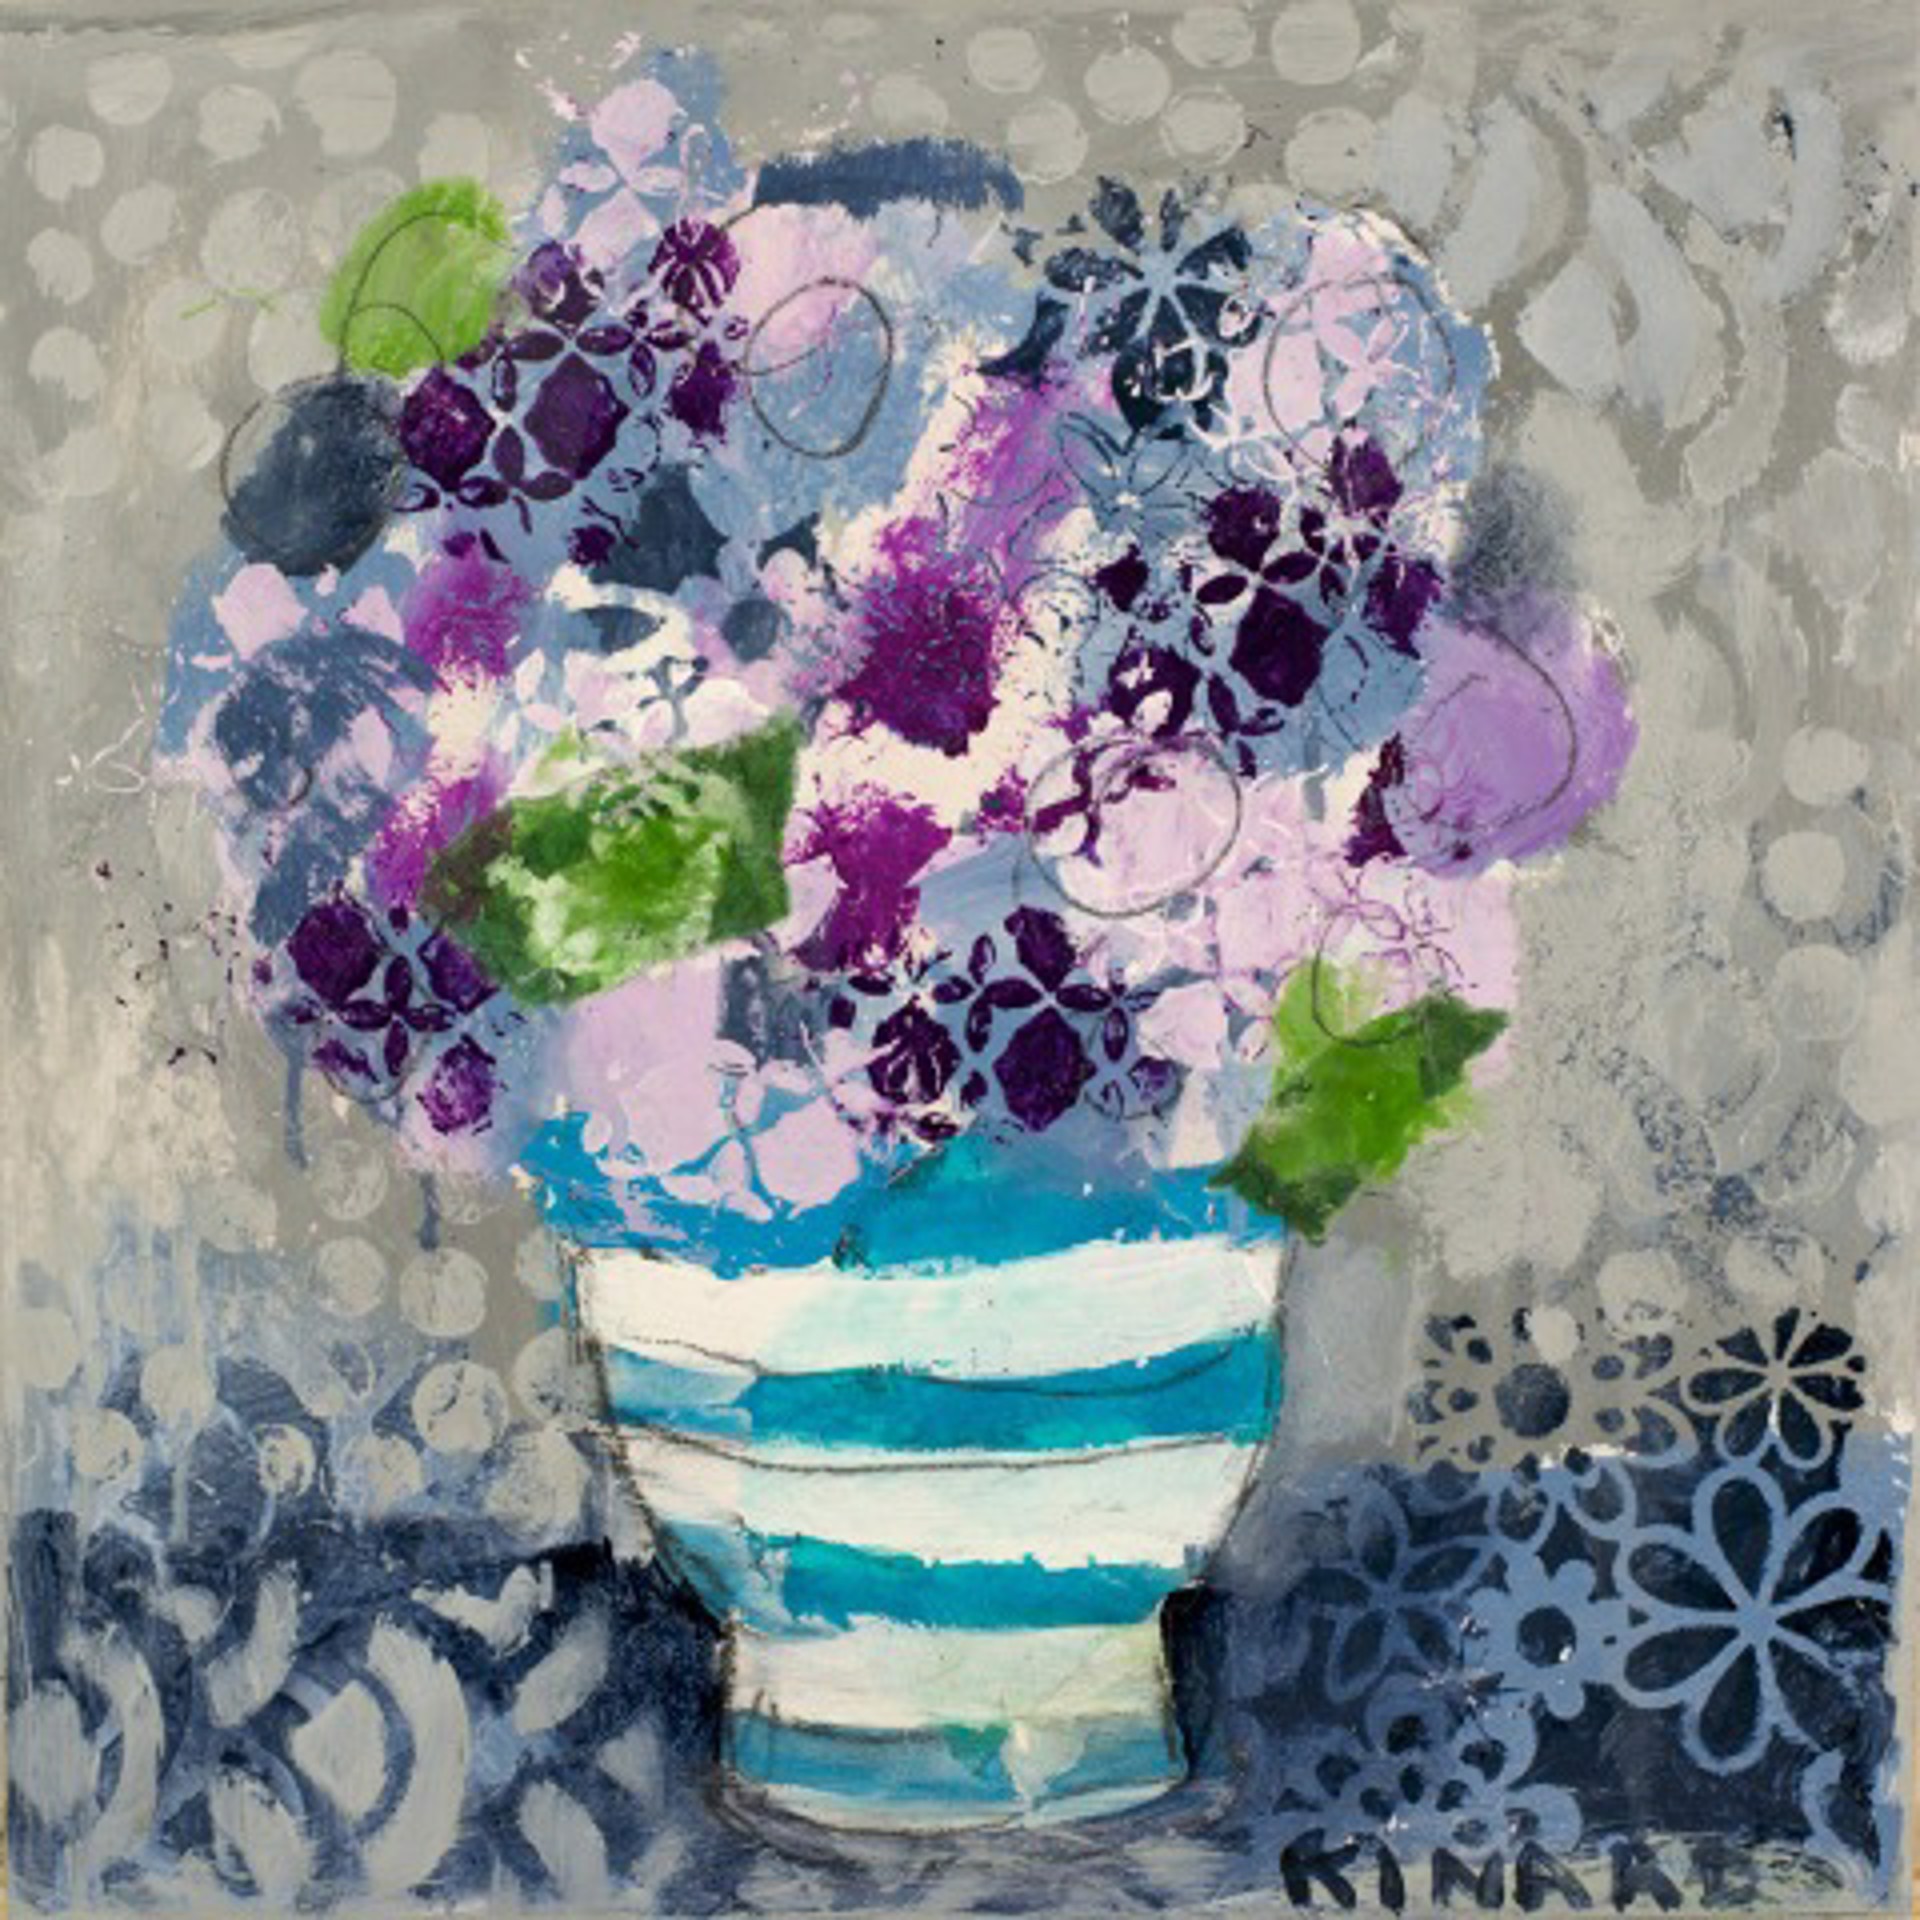 Picasso Vase II by Christy Kinard